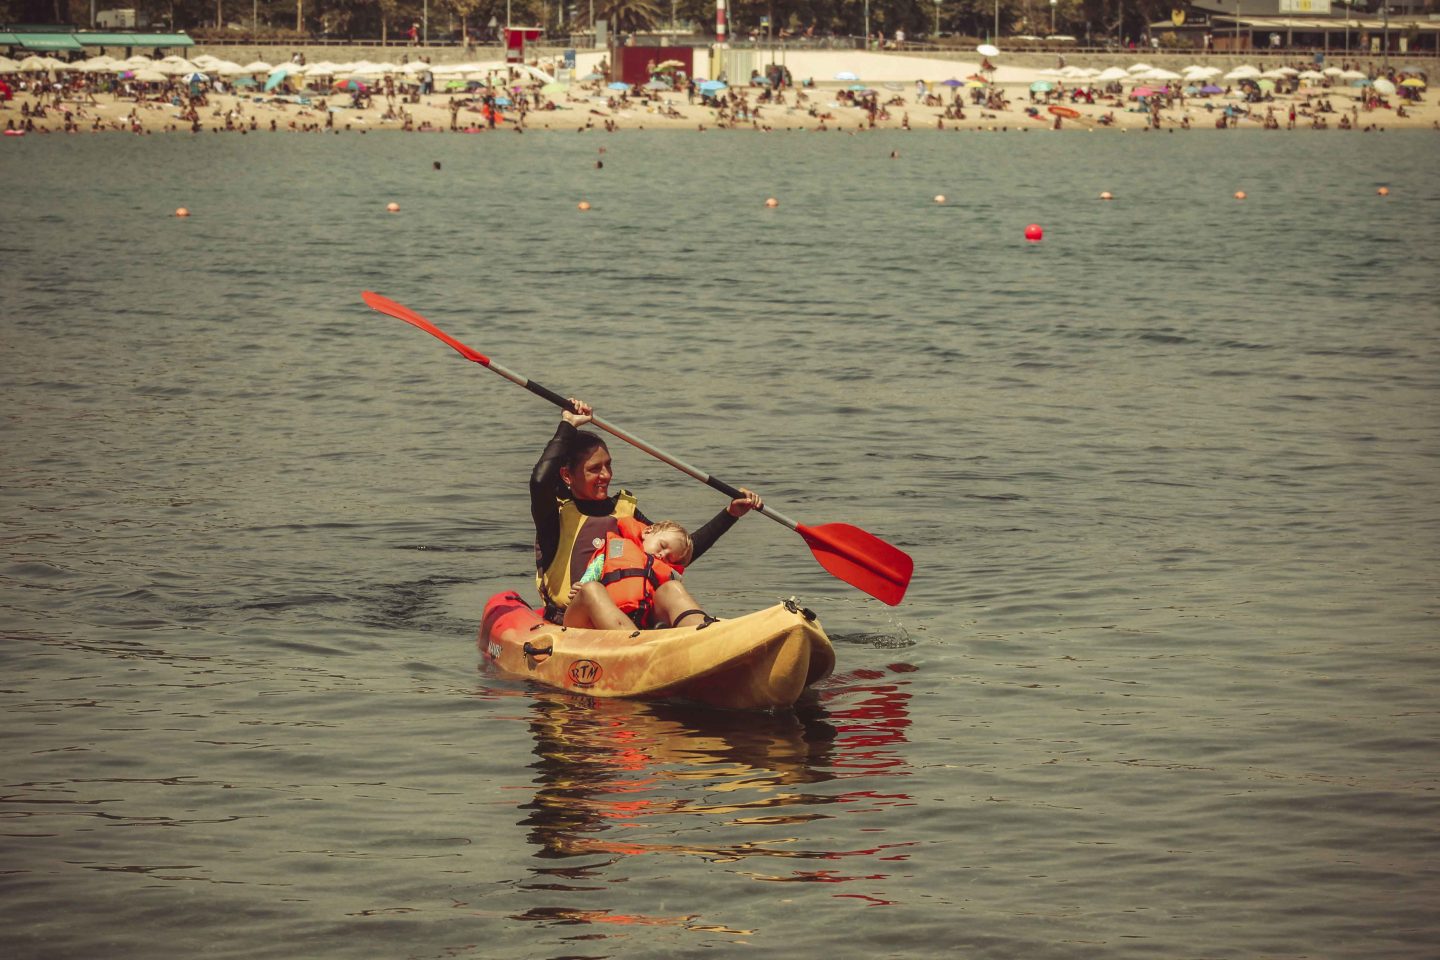 Kayak and Paddle Surf with kids. How we are preparing our kids for